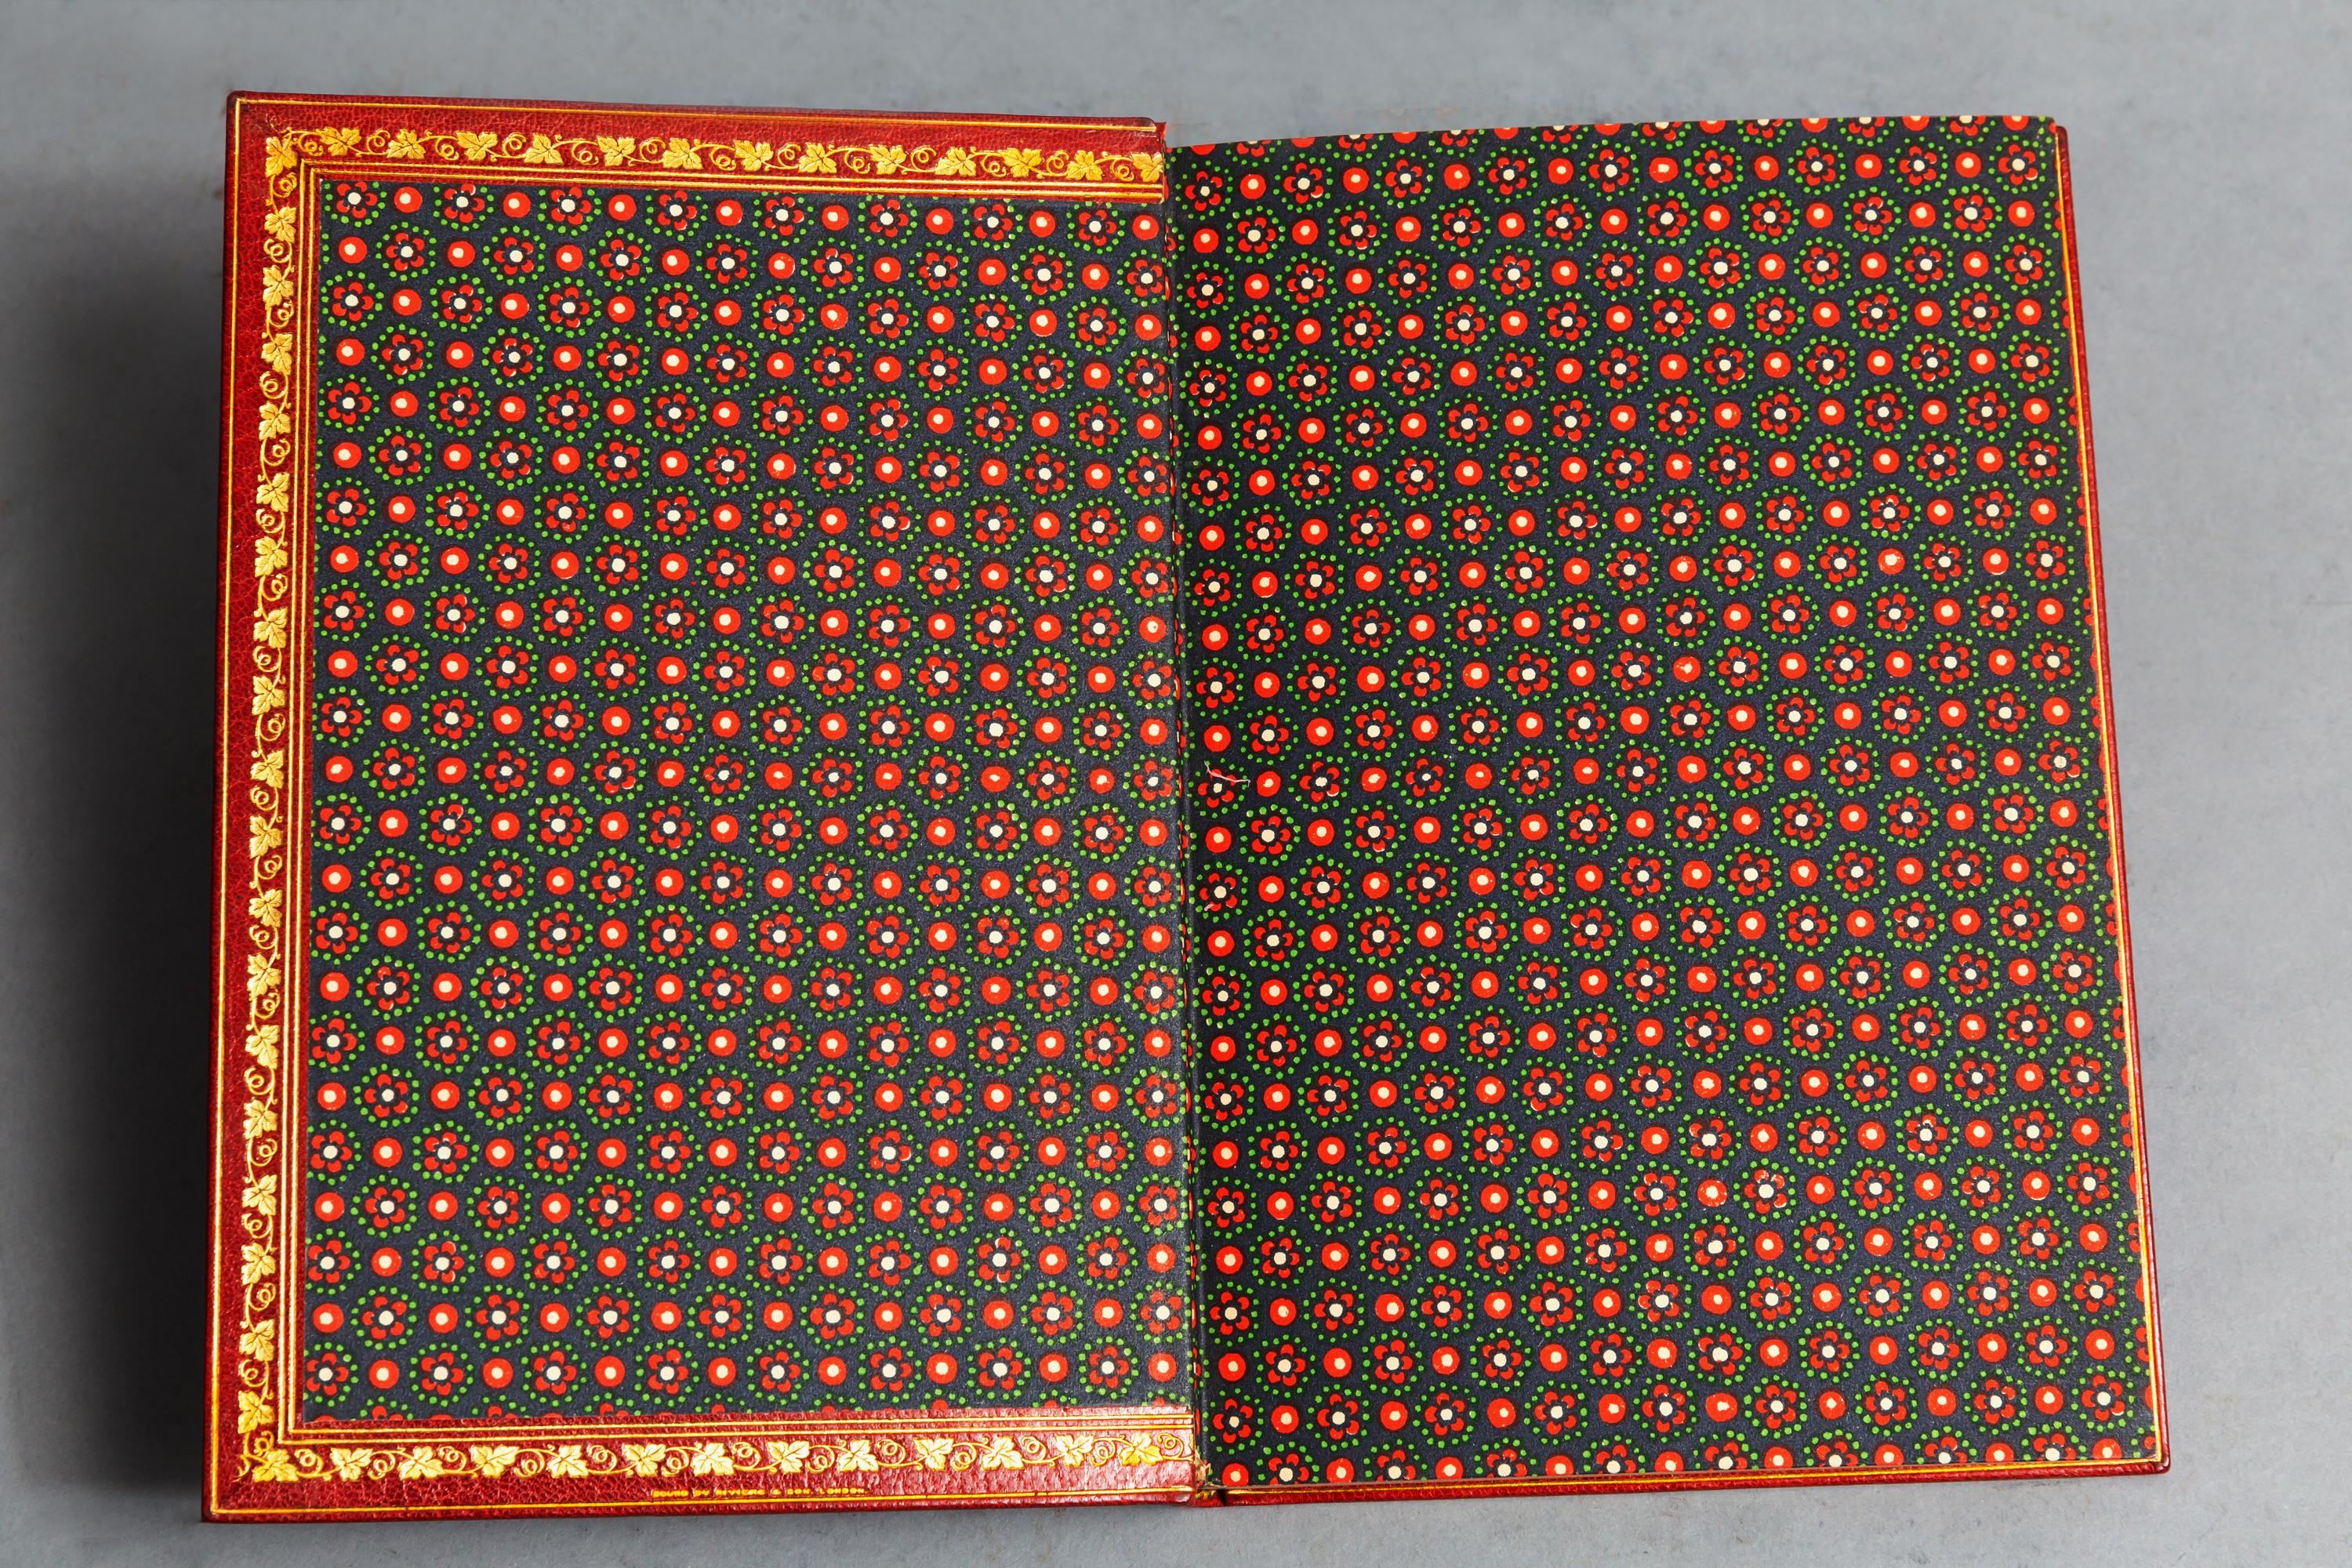 1 volume.

Edward Fitzgerald. Rubaiyat of Omar Khayyam. Bound in full red Morocco with elaborate floral on covers, gilt spine, top edges gilt. Limited to 88 copies, this is #71. 

Published: London: Essex House Press N.D. 1920. 

Beautiful